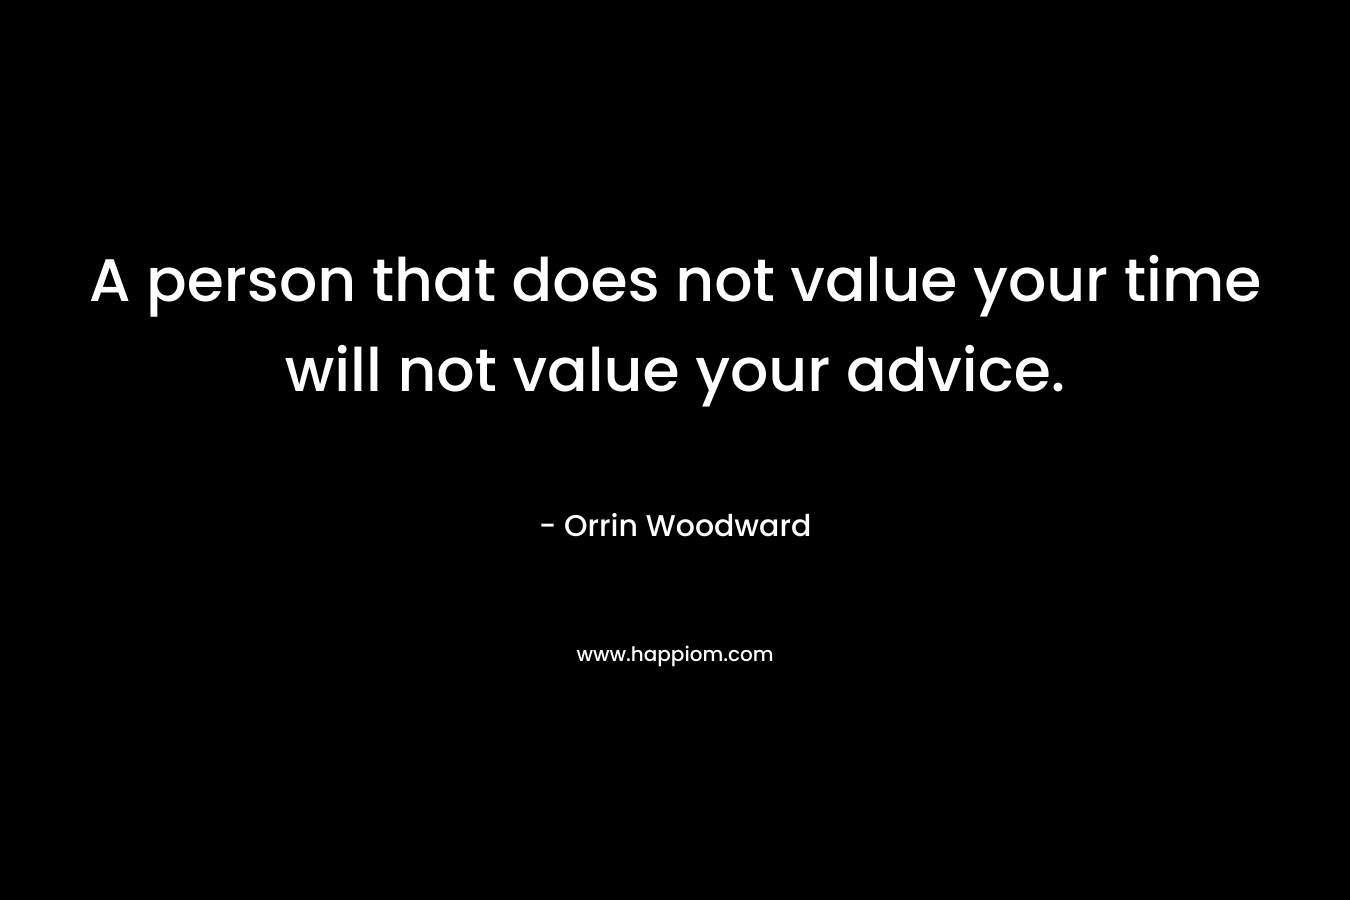 A person that does not value your time will not value your advice.